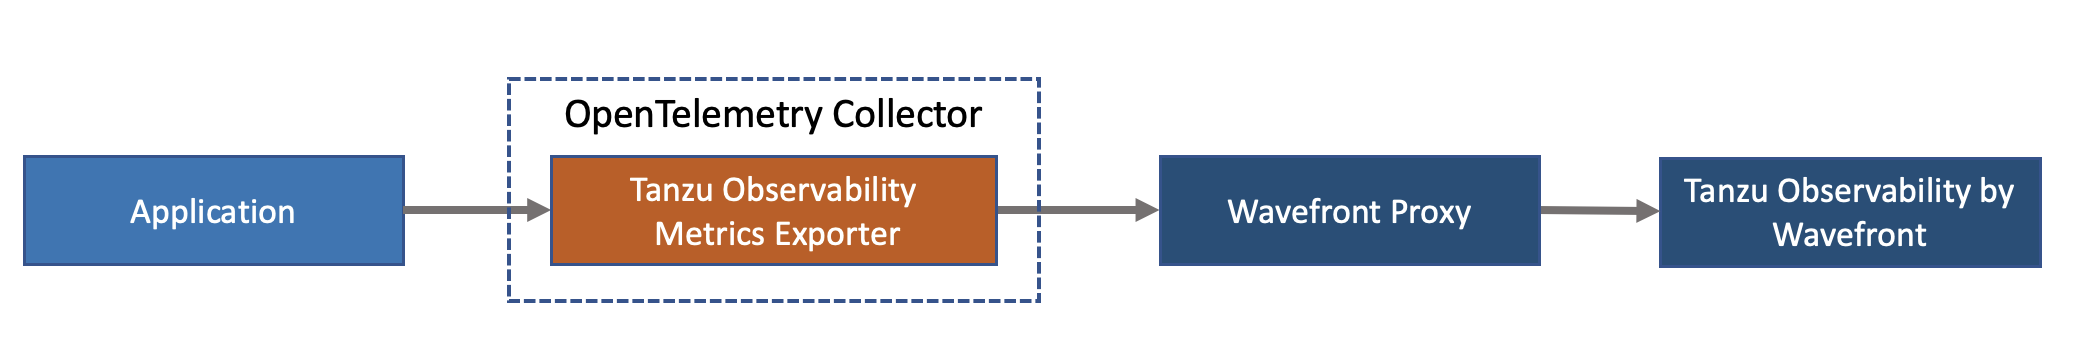 The diagram shows how the data flows from an application to OpenTelemetry collector, which has the OpenTelemetry exporter, to the wavefront proxy, which has the OpenTelemetry receiver, and finally to Tanzu Observability.